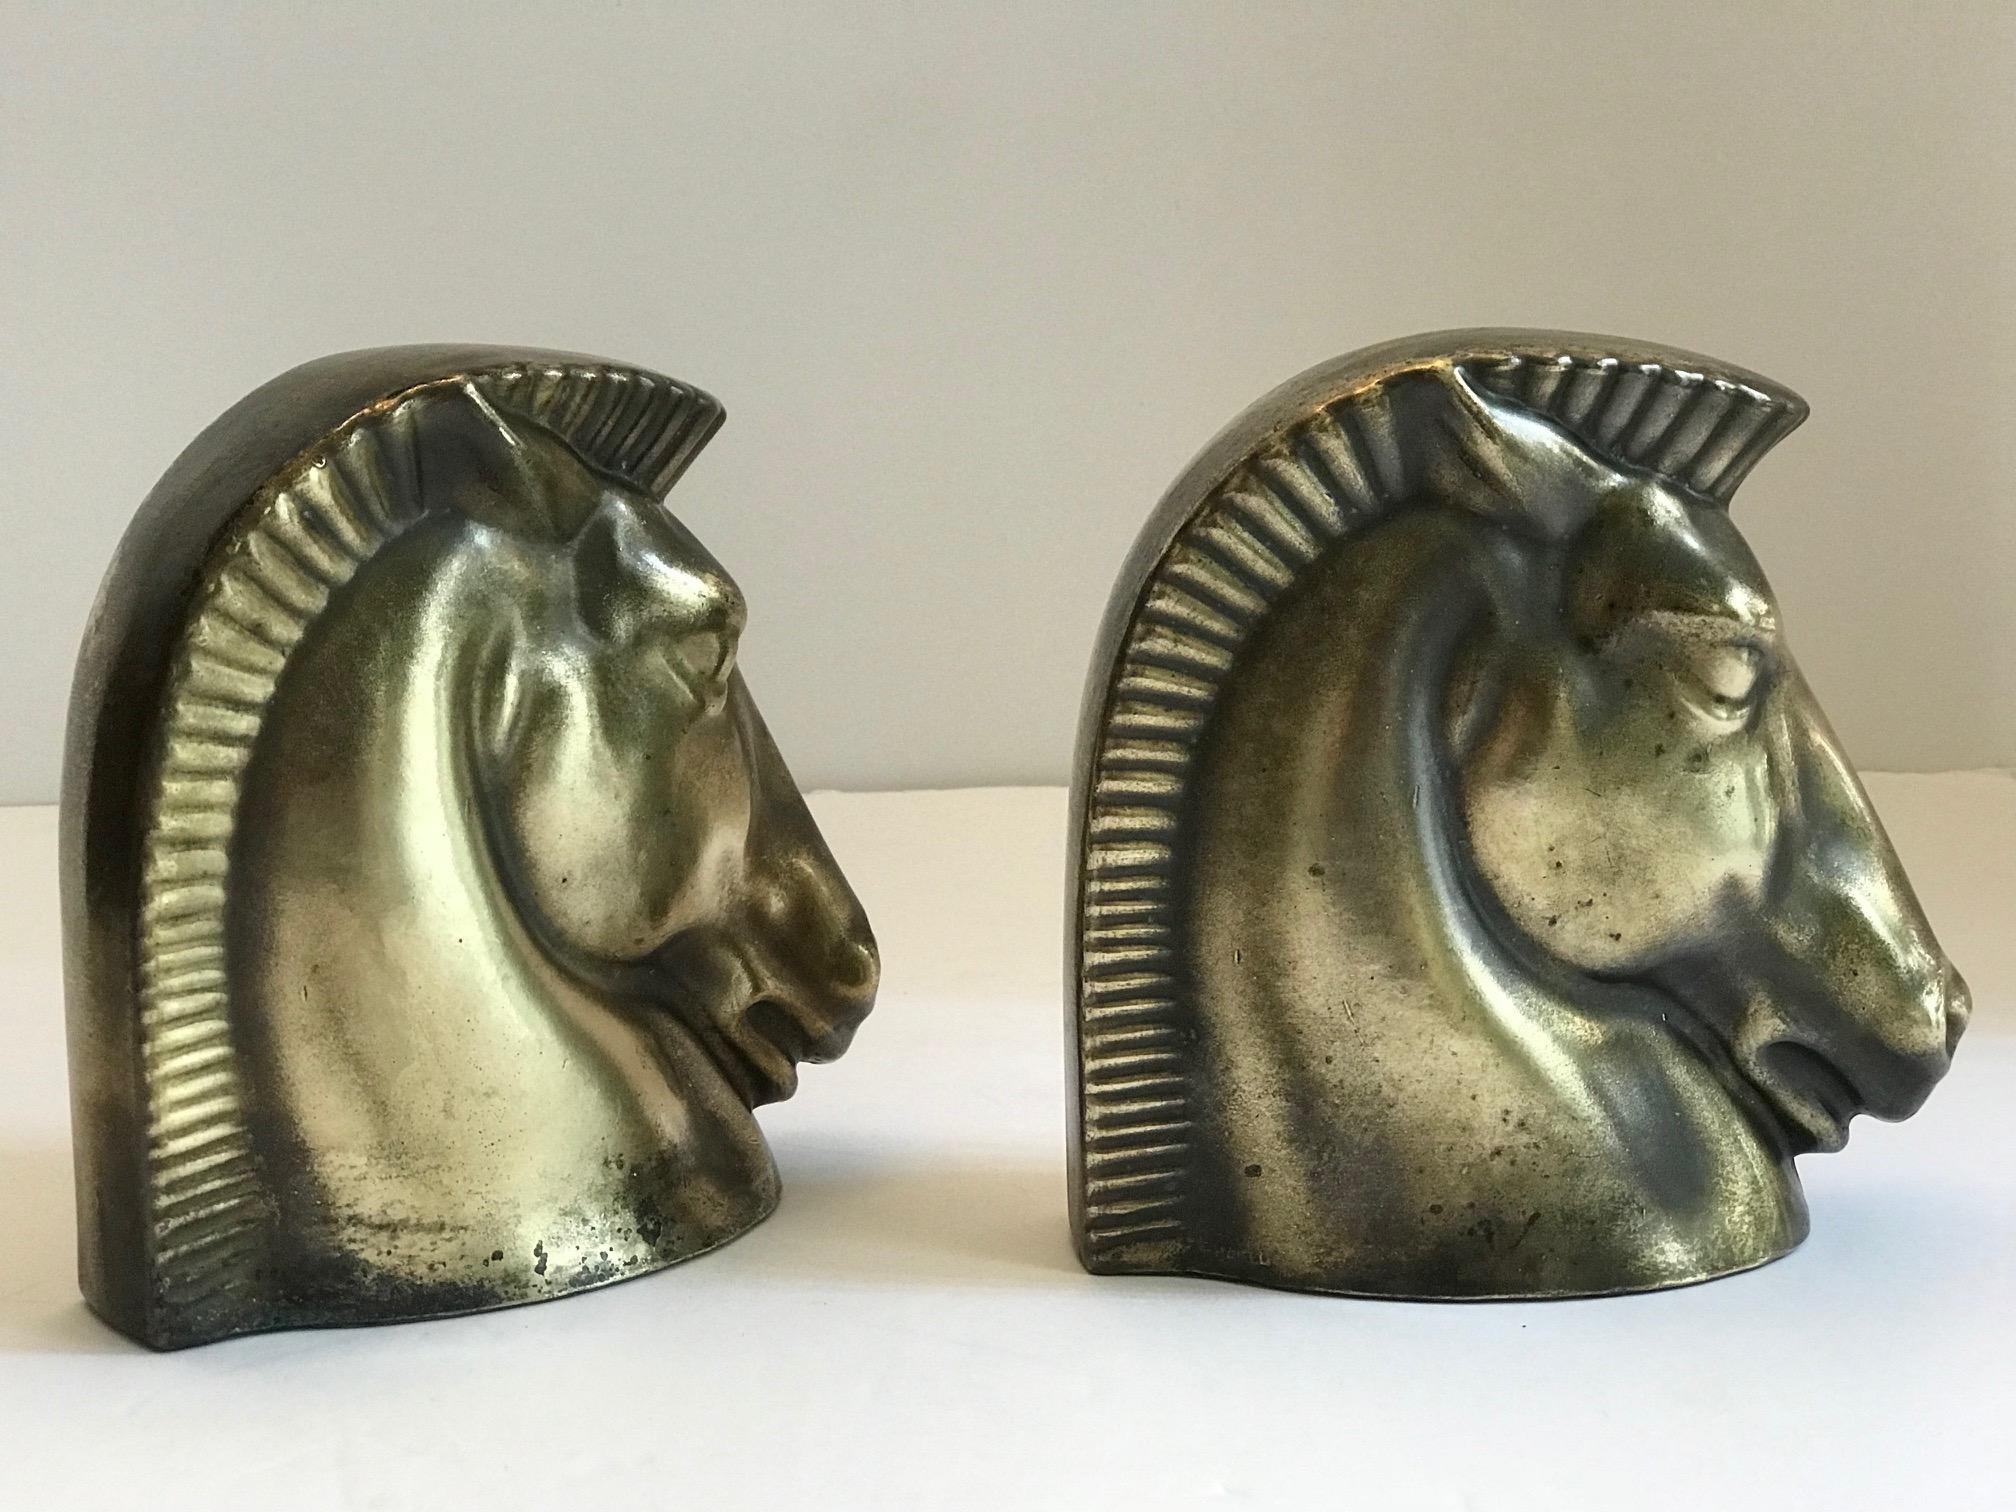 Pair of Art Deco Brass Plated Trojan Horse Bookends by Frankart 11